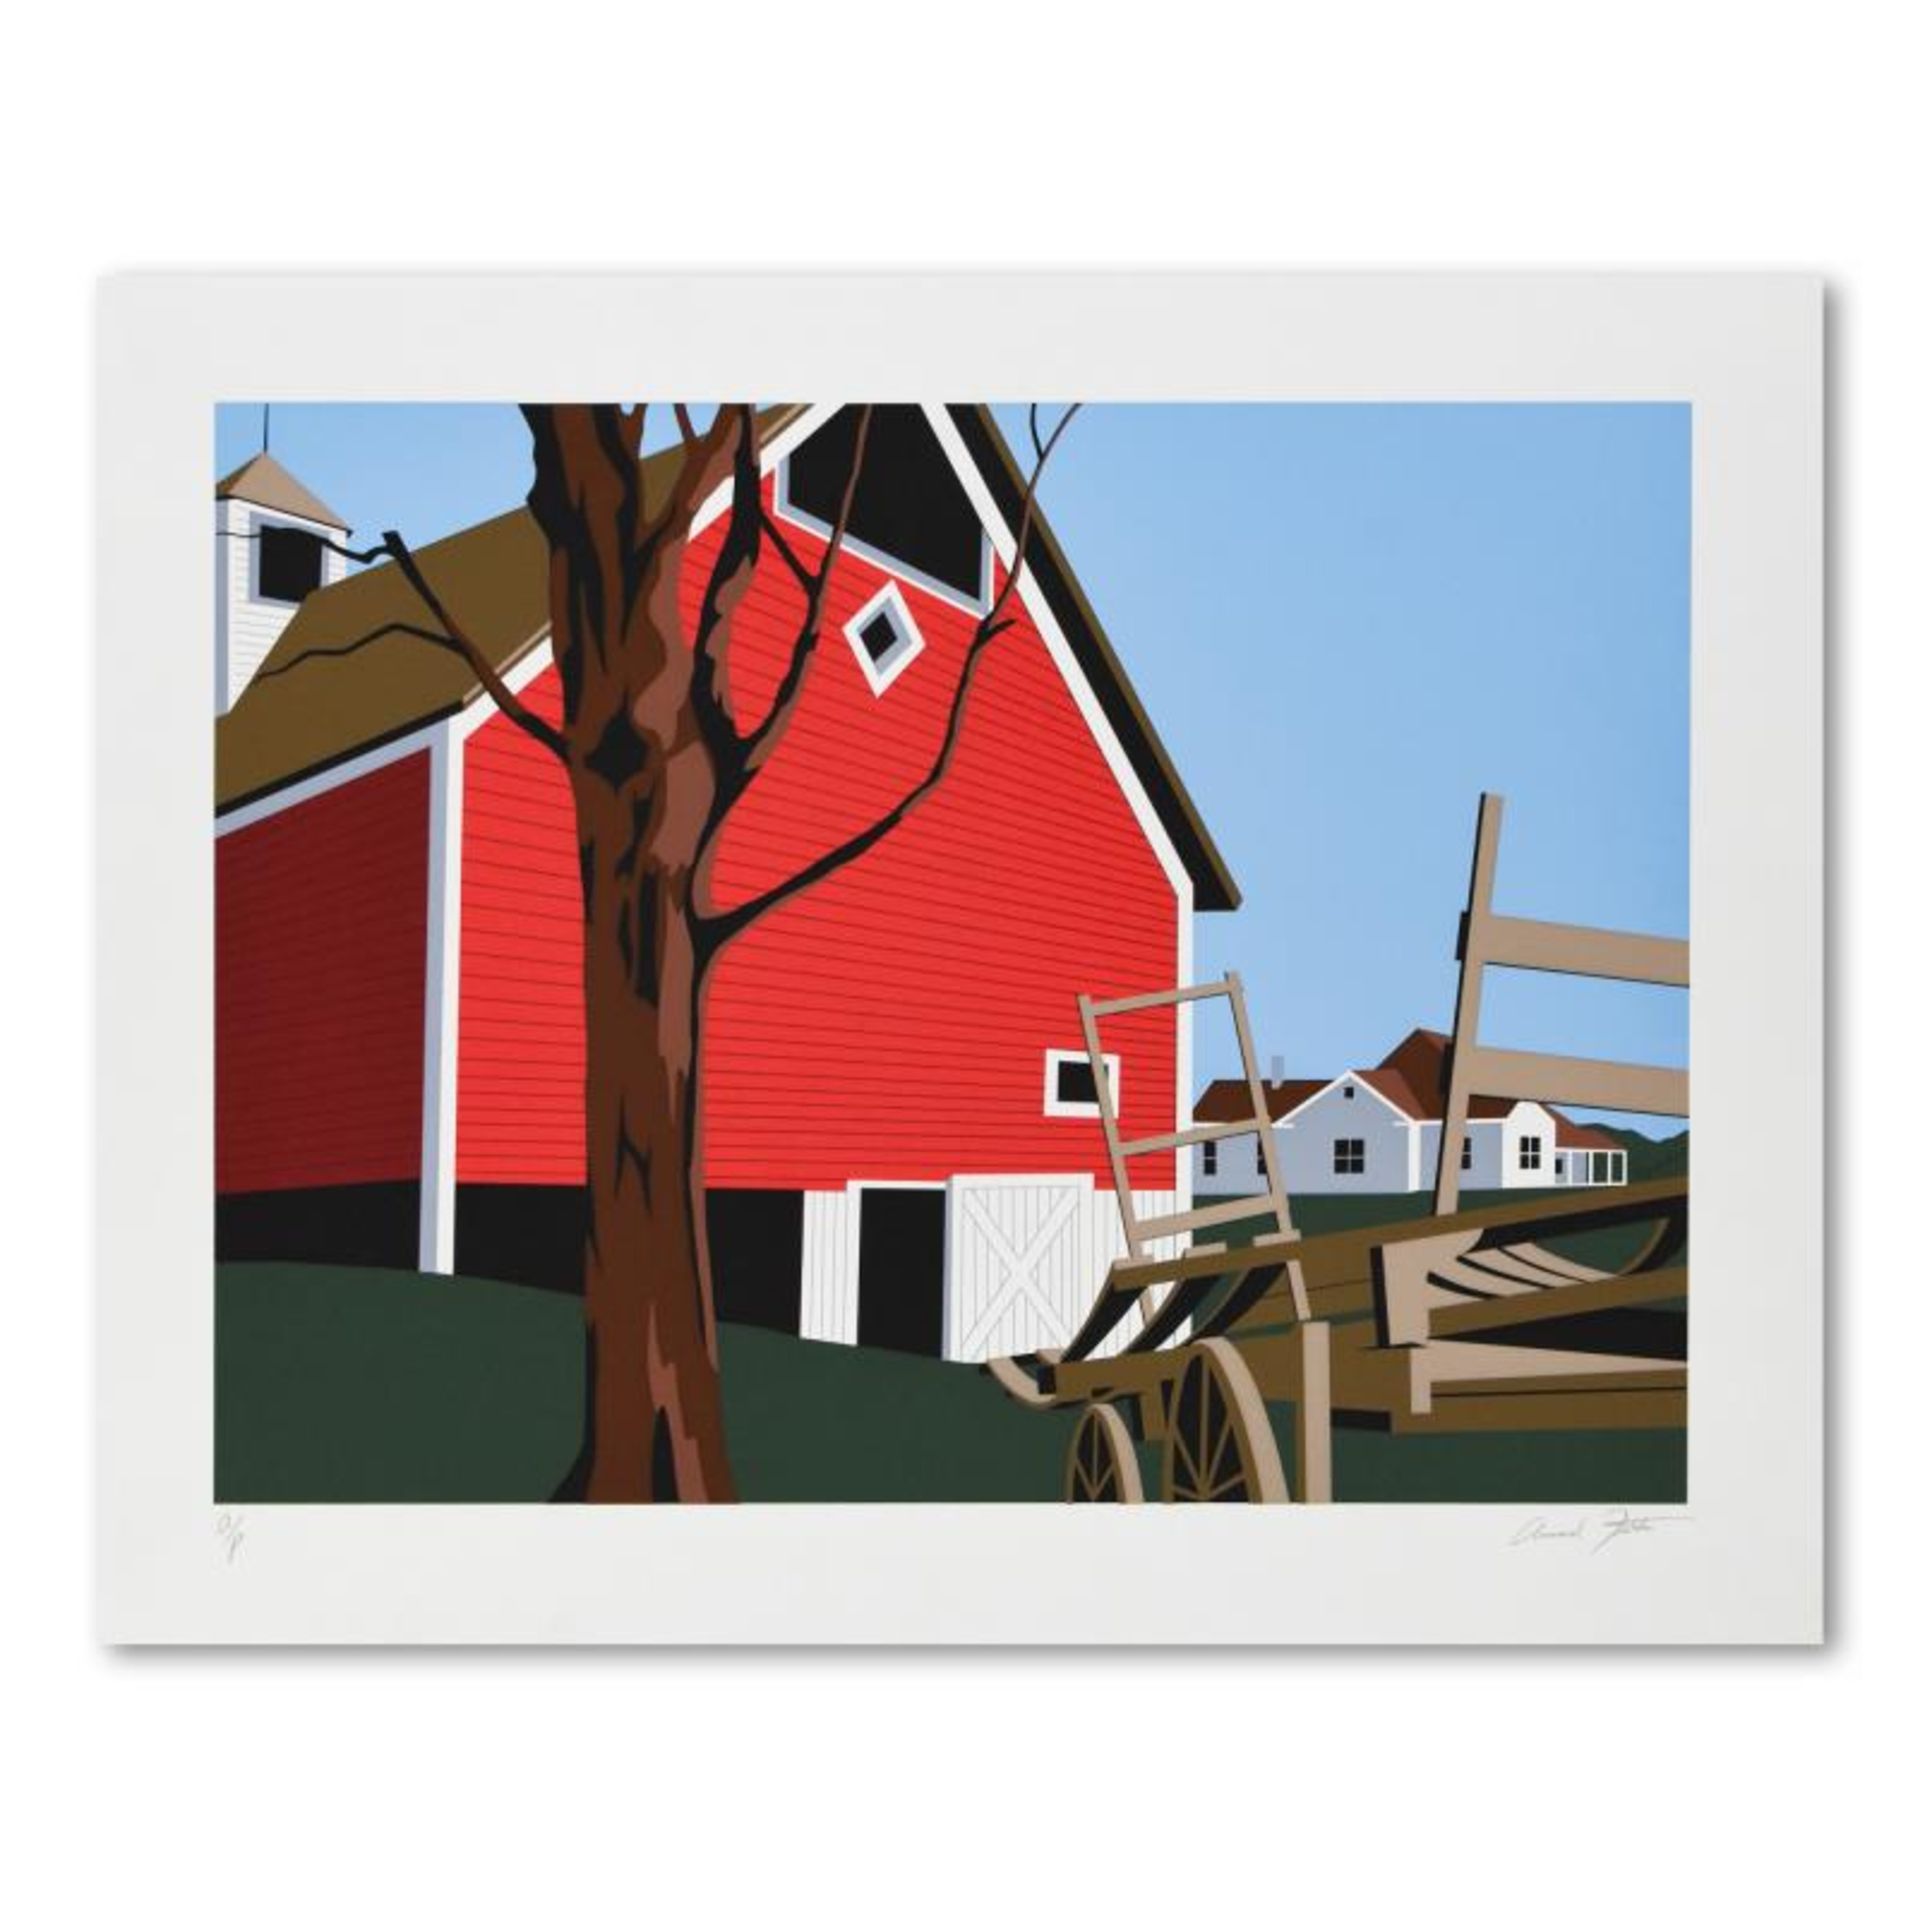 Armond Fields (1930-2008), "Red Barn" Limited Edition Hand Pulled Original Serig